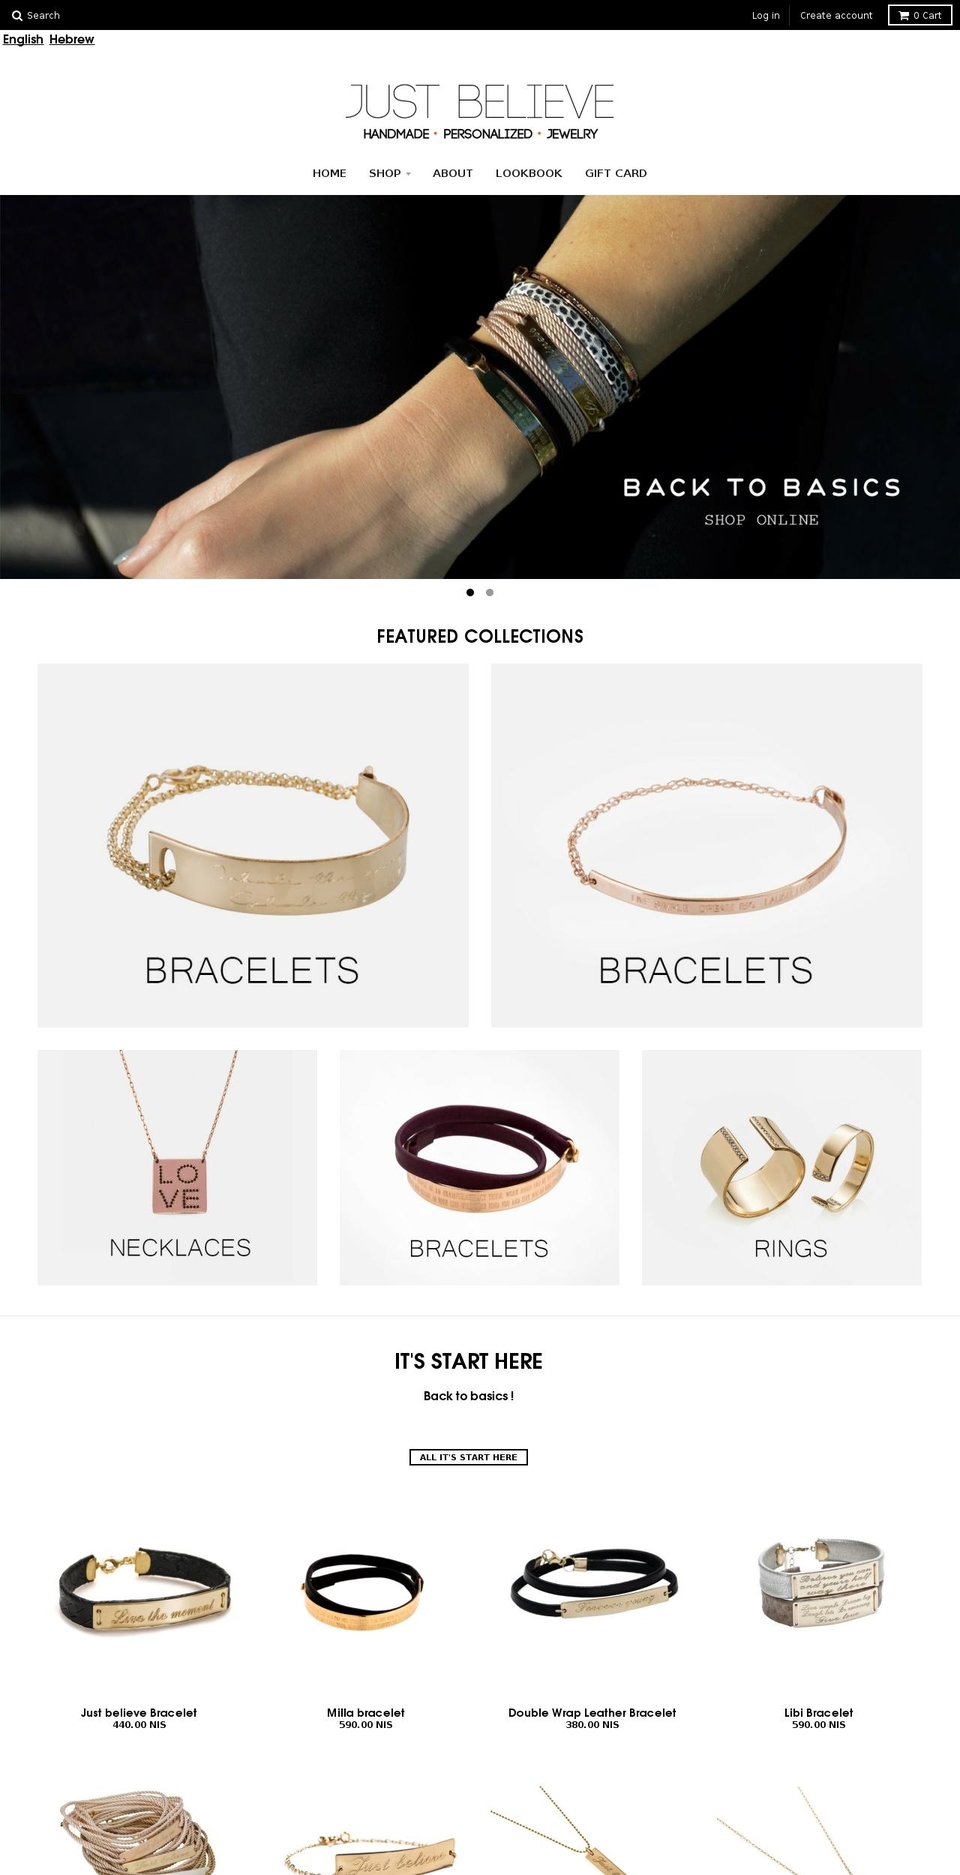 Reformation Shopify theme site example justbelievejewelry.com